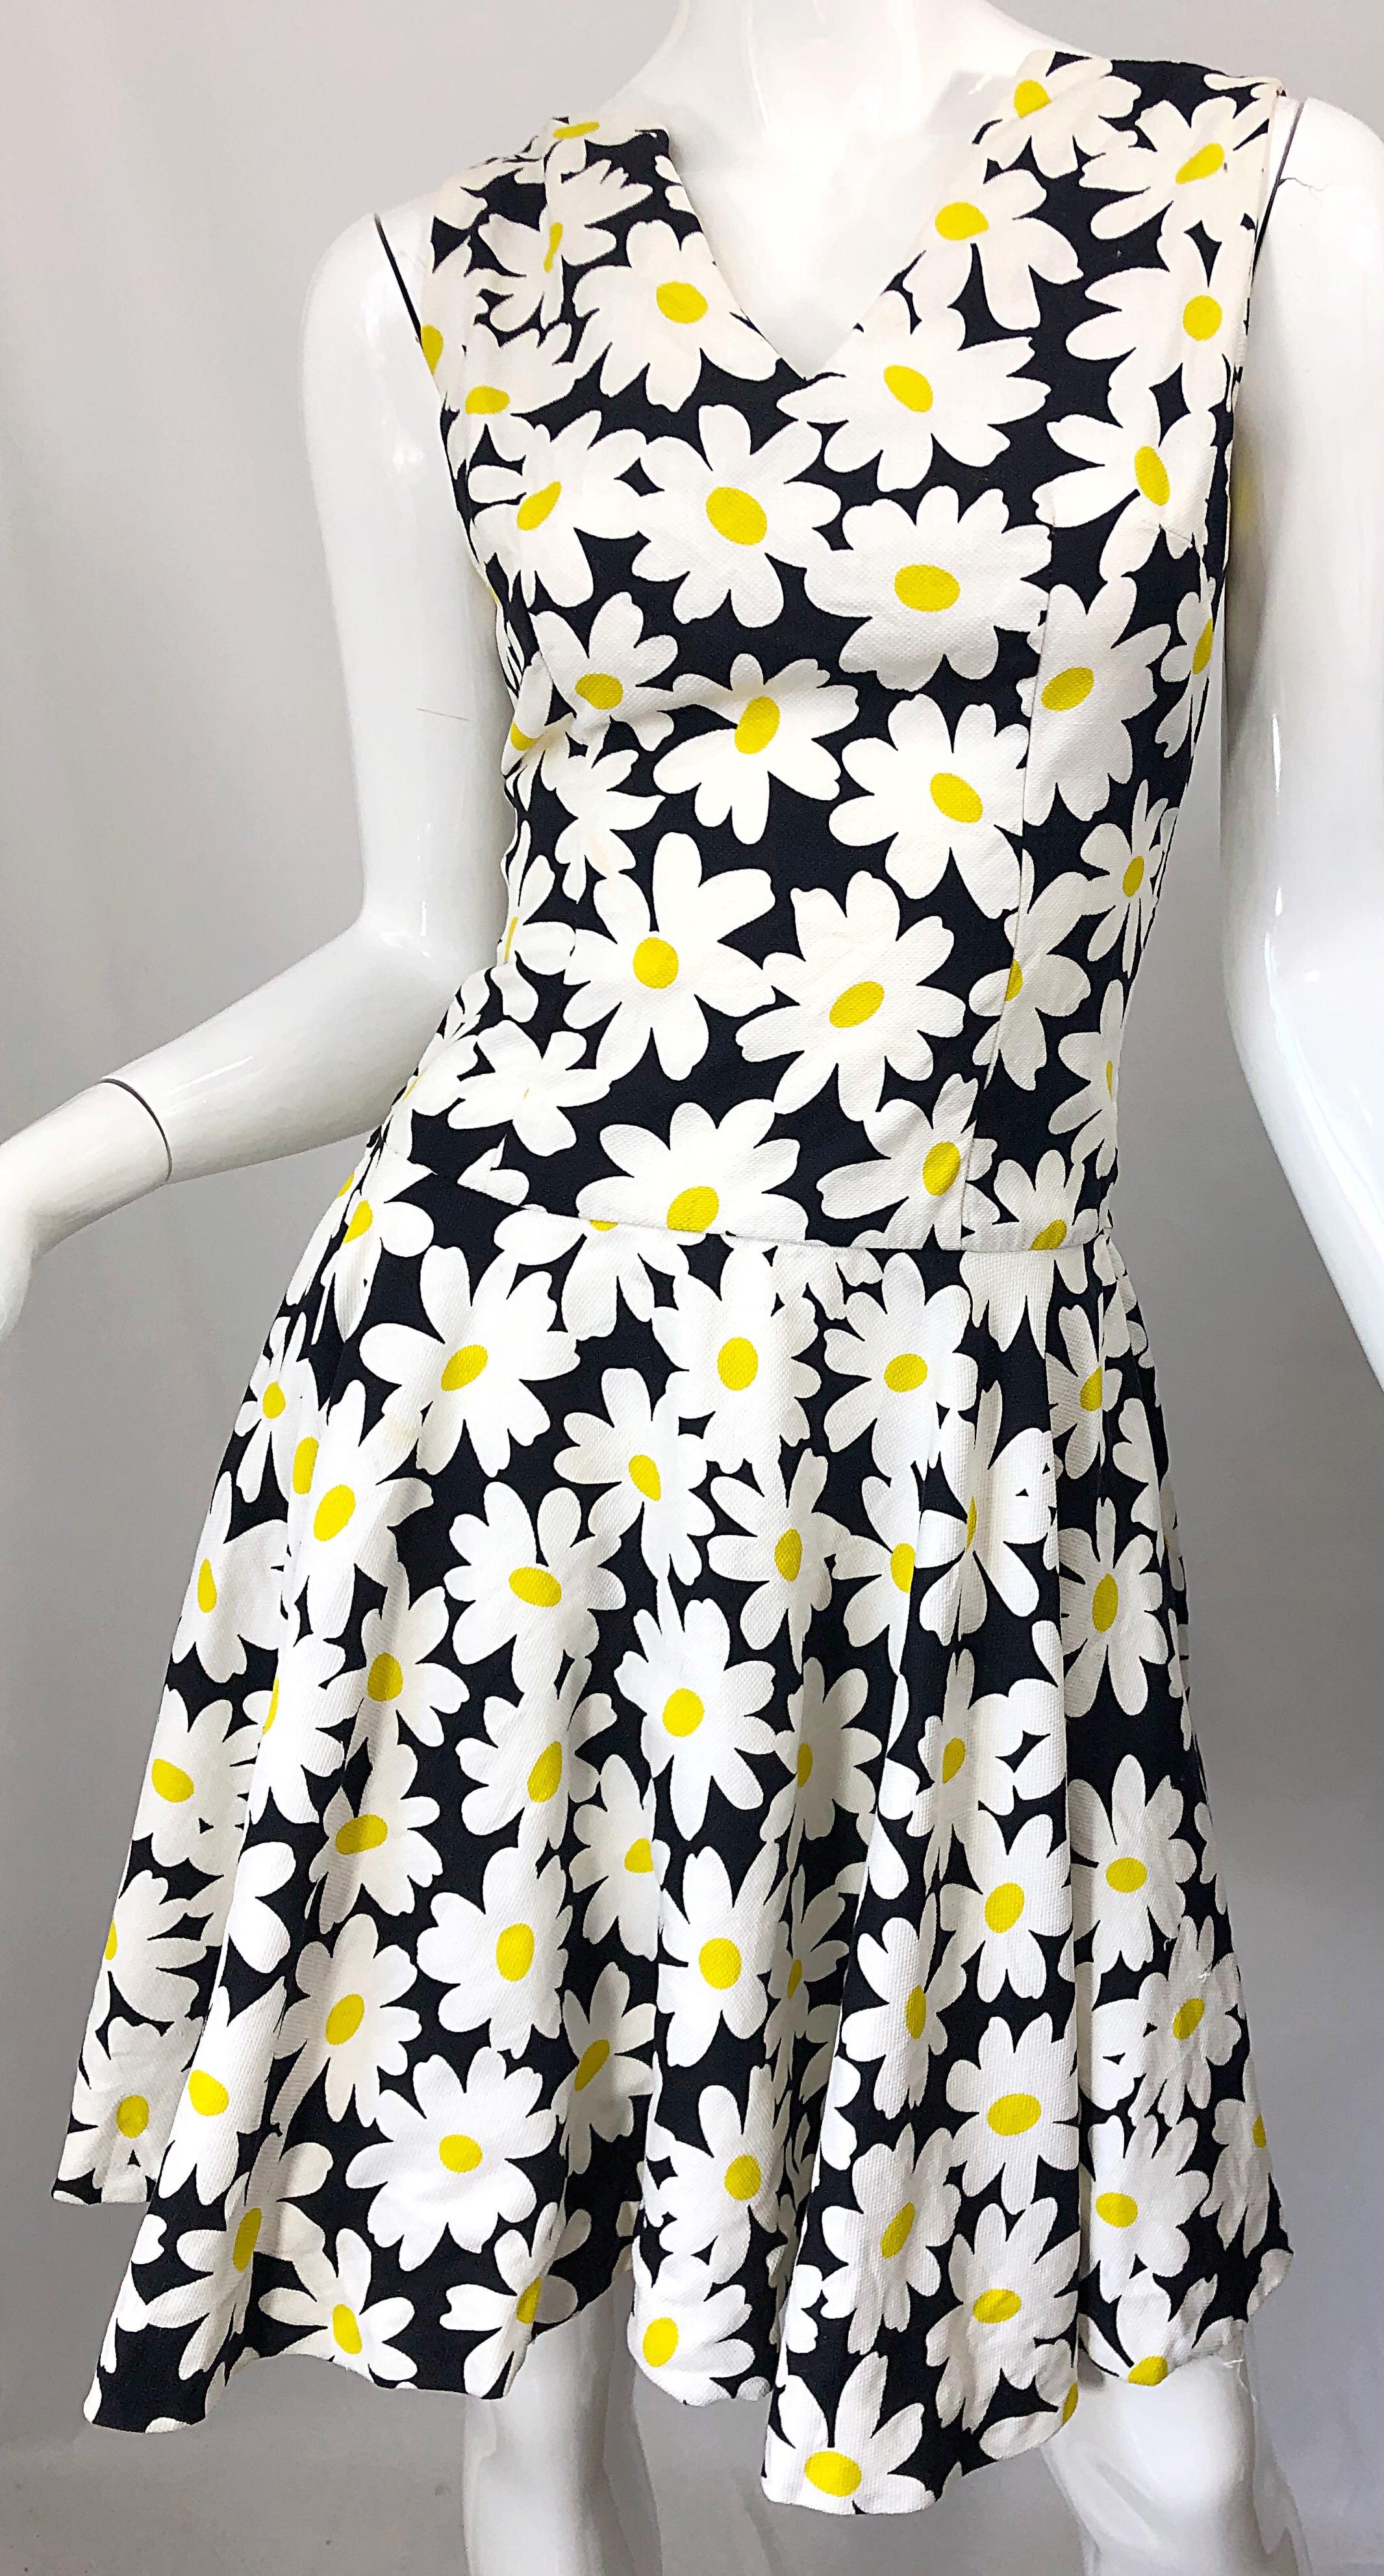 I Magnin 1960s Black and White Daisy Print Pique Cotton Vintage 60s A Line Dress In Excellent Condition For Sale In San Diego, CA